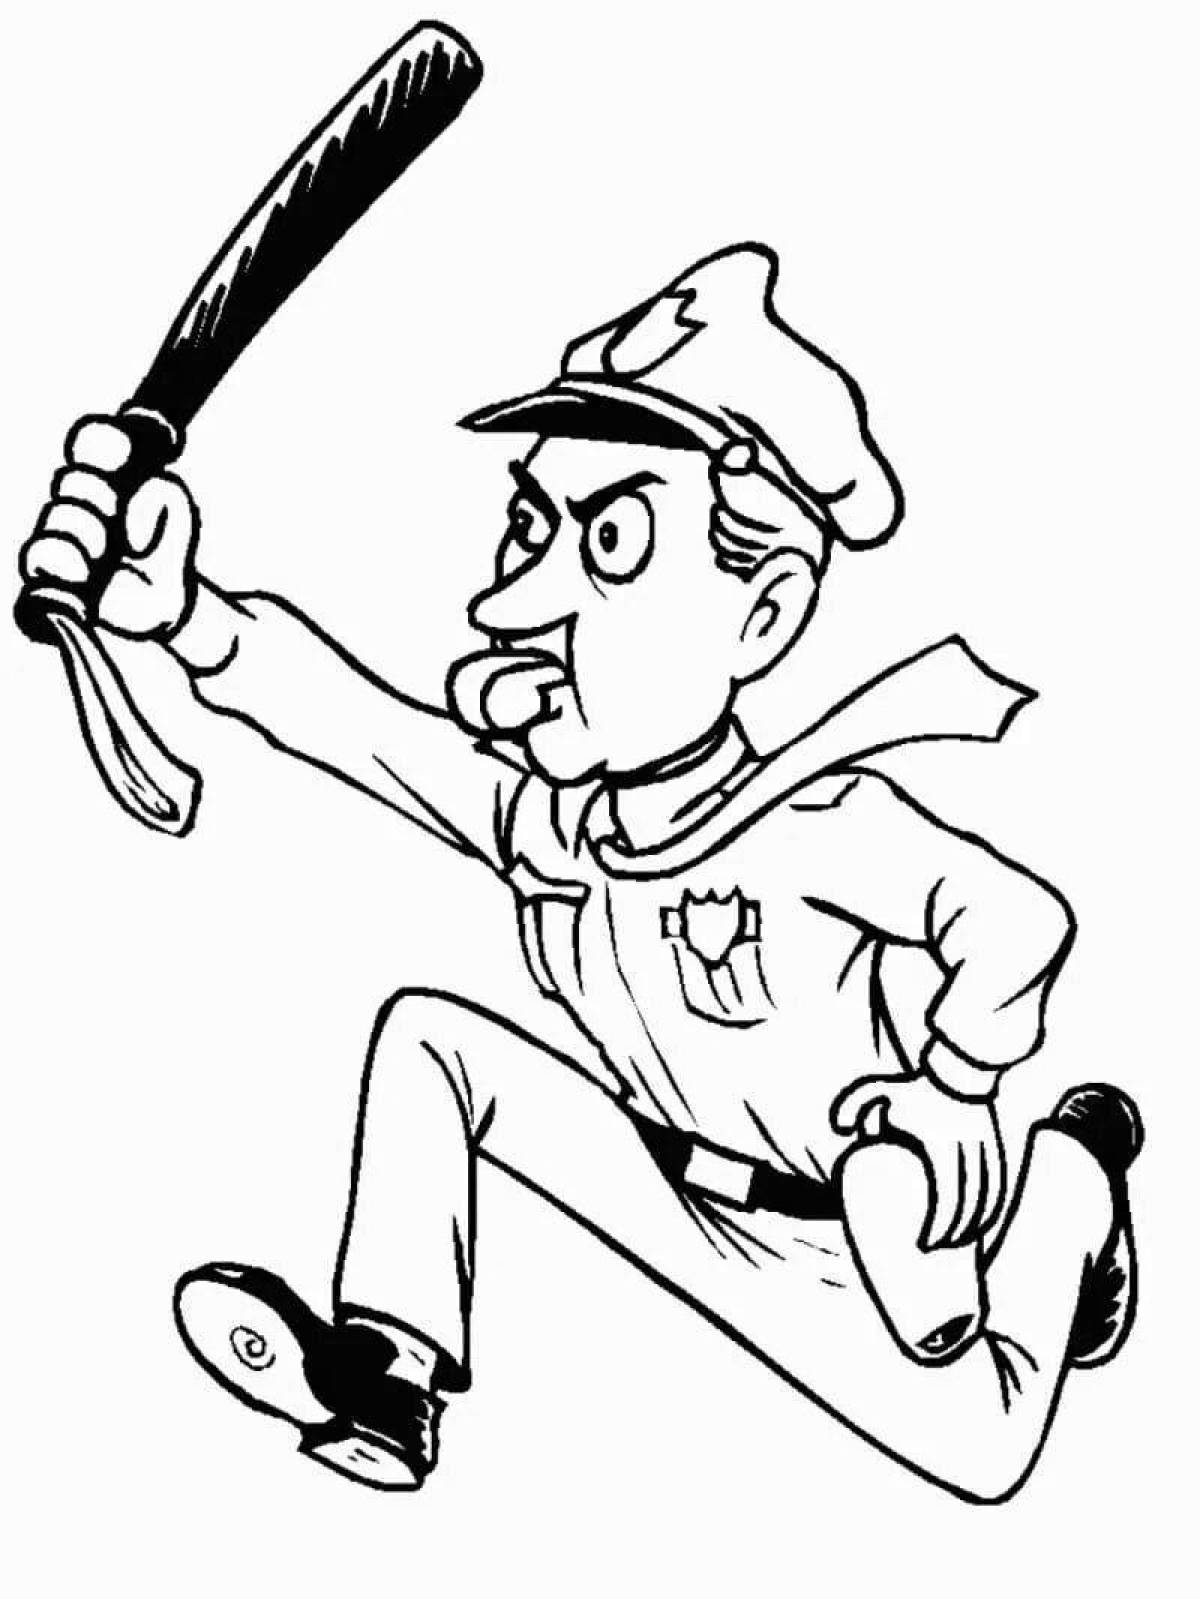 Police figurine noble coloring page